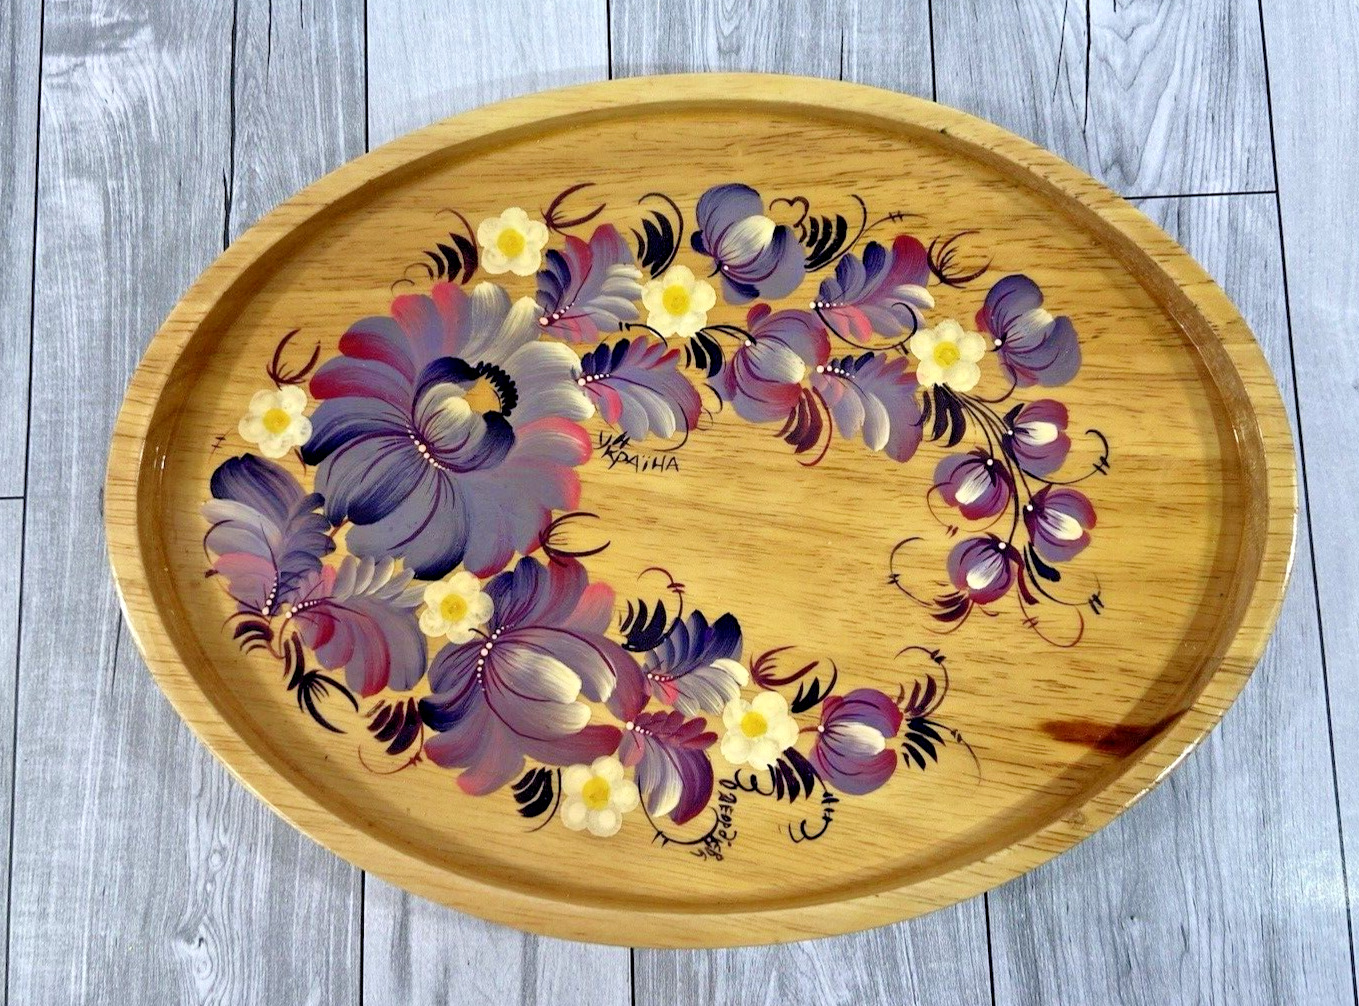 Floral Wooden Hand Painted Serving Tray Platter Made in Greece SIGNED 10 Inches